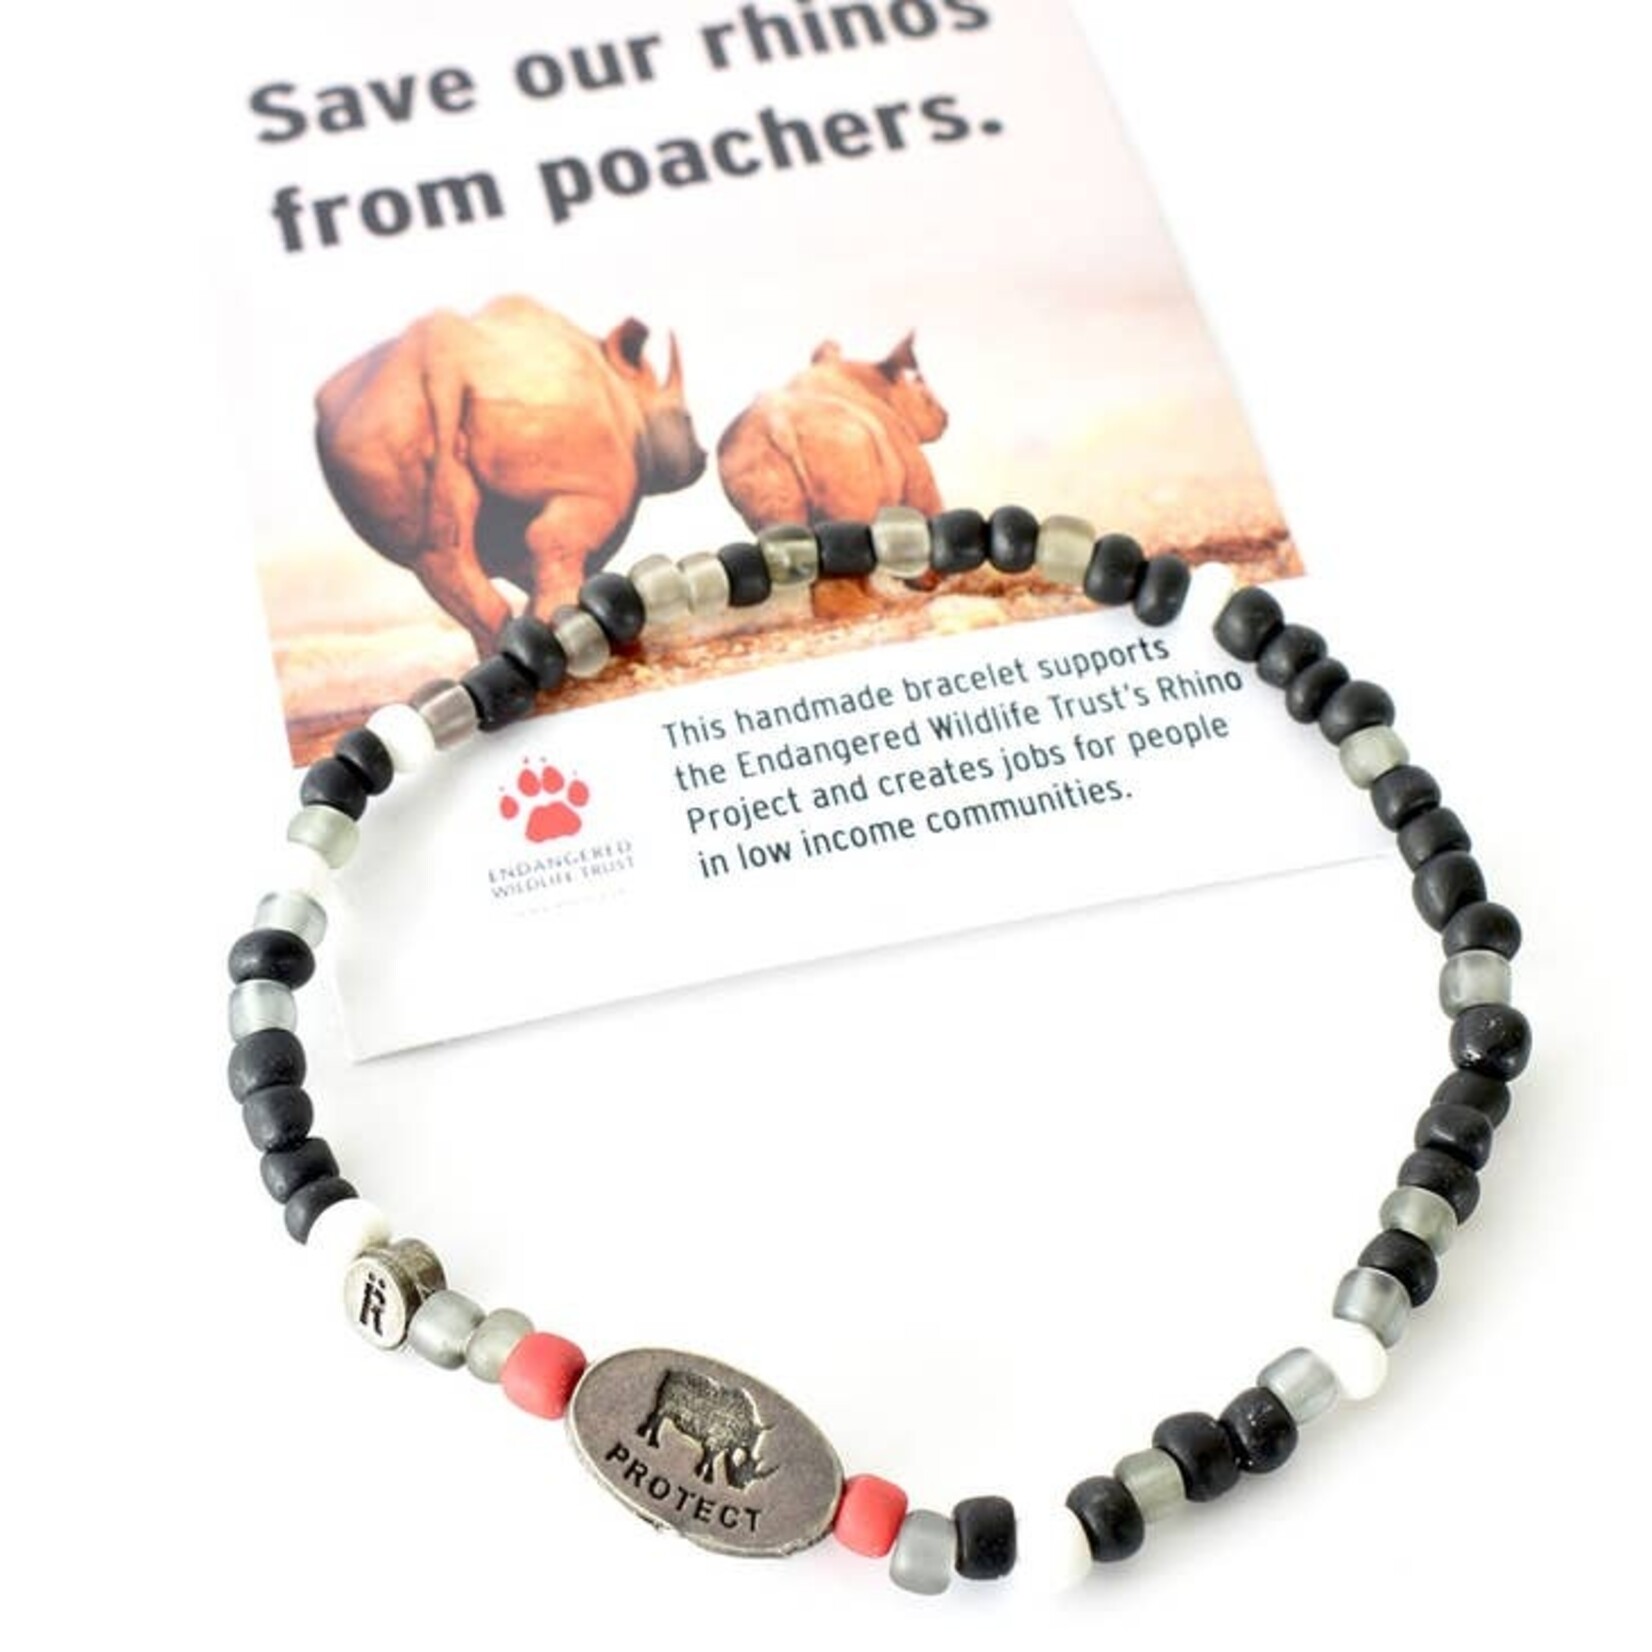 Swahili African Modern Rhino Project South African Cause Bracelet, South Africa